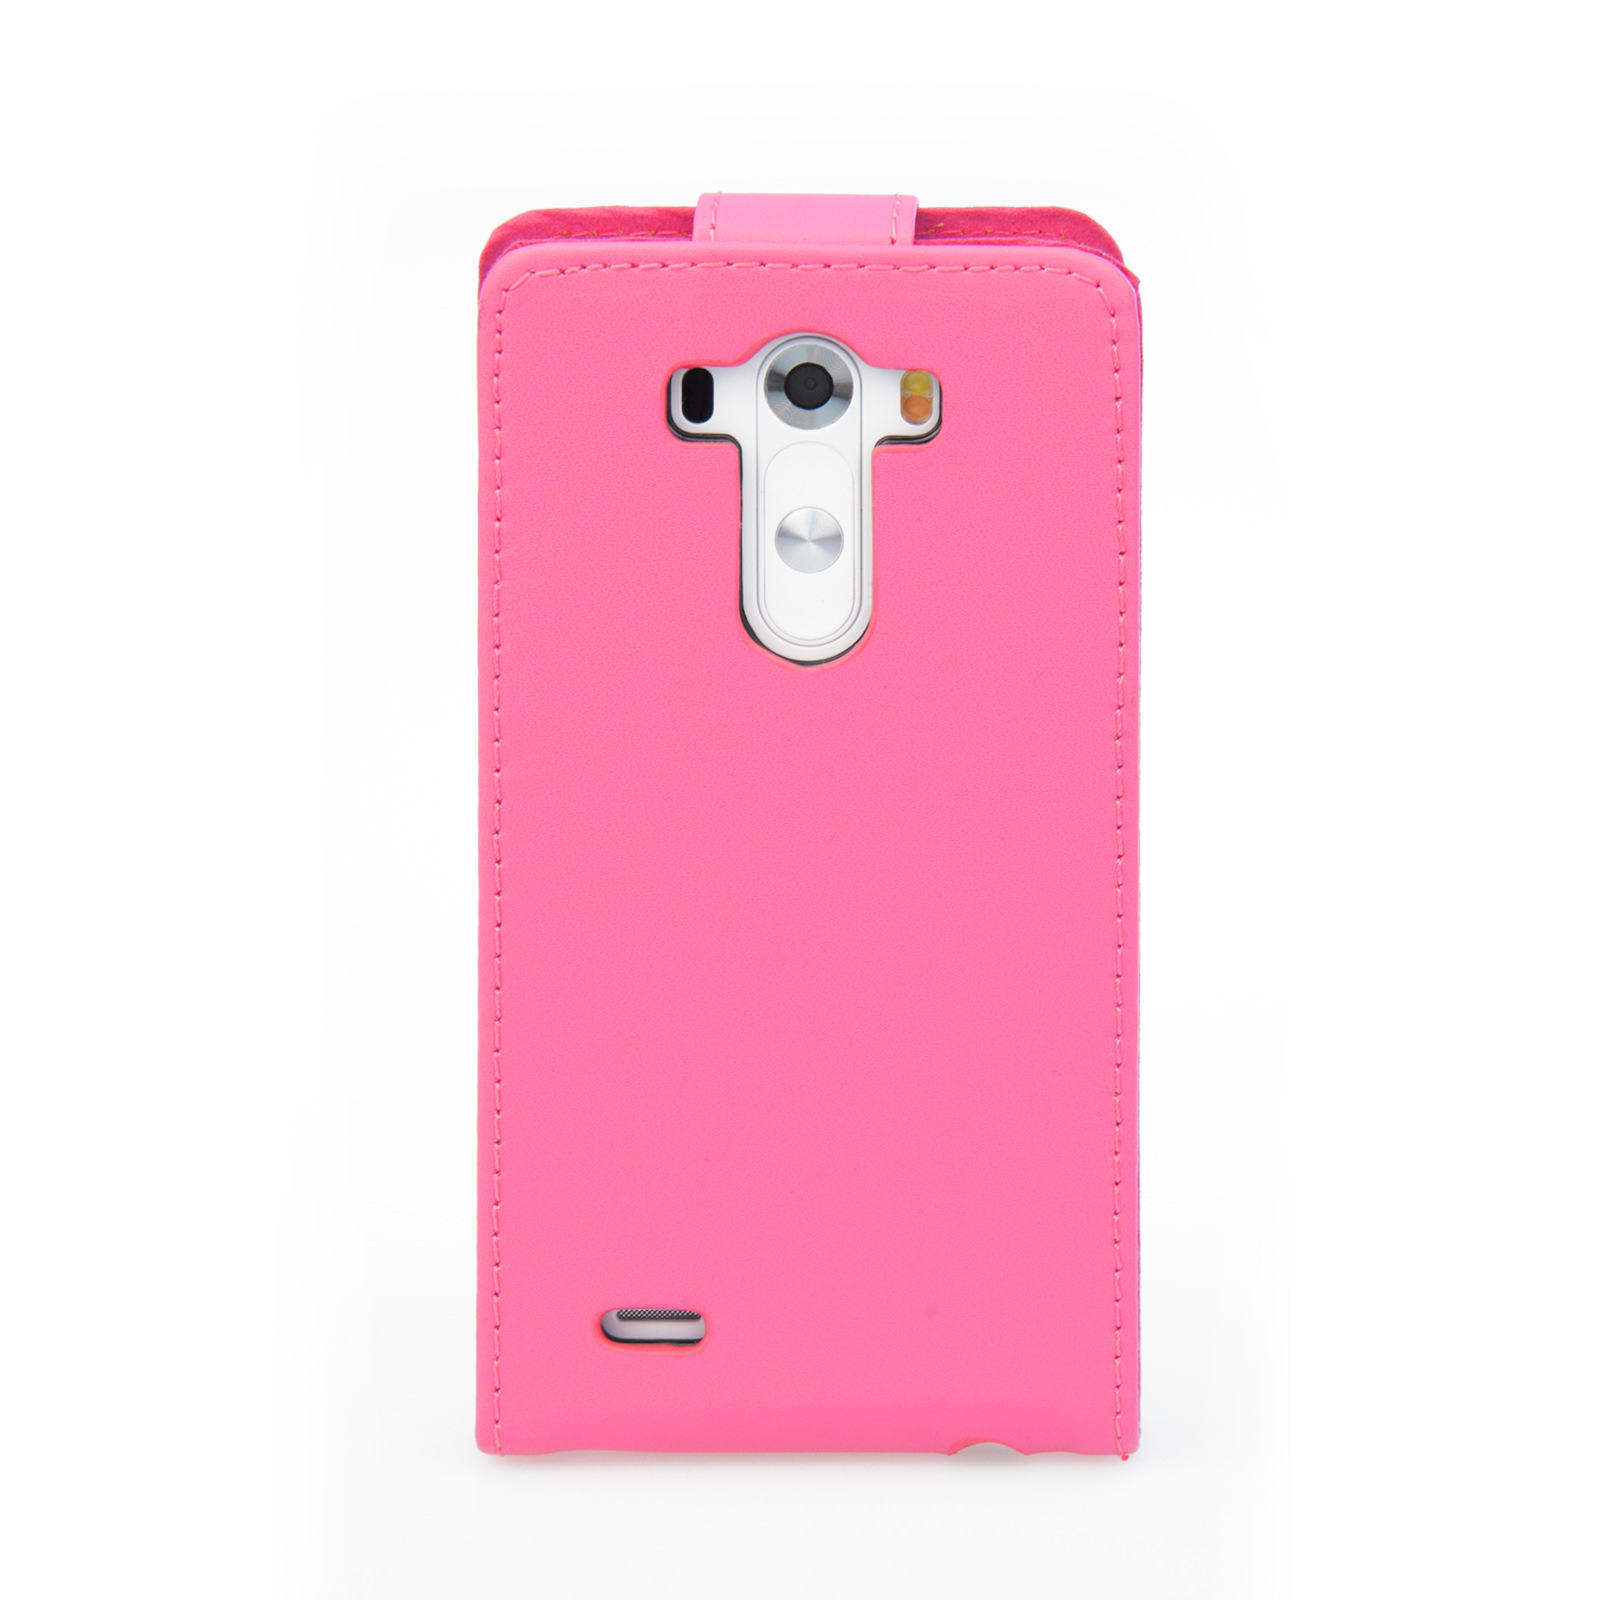 YouSave Accessories LG G3 Leather-Effect Flip Case - Hot Pink